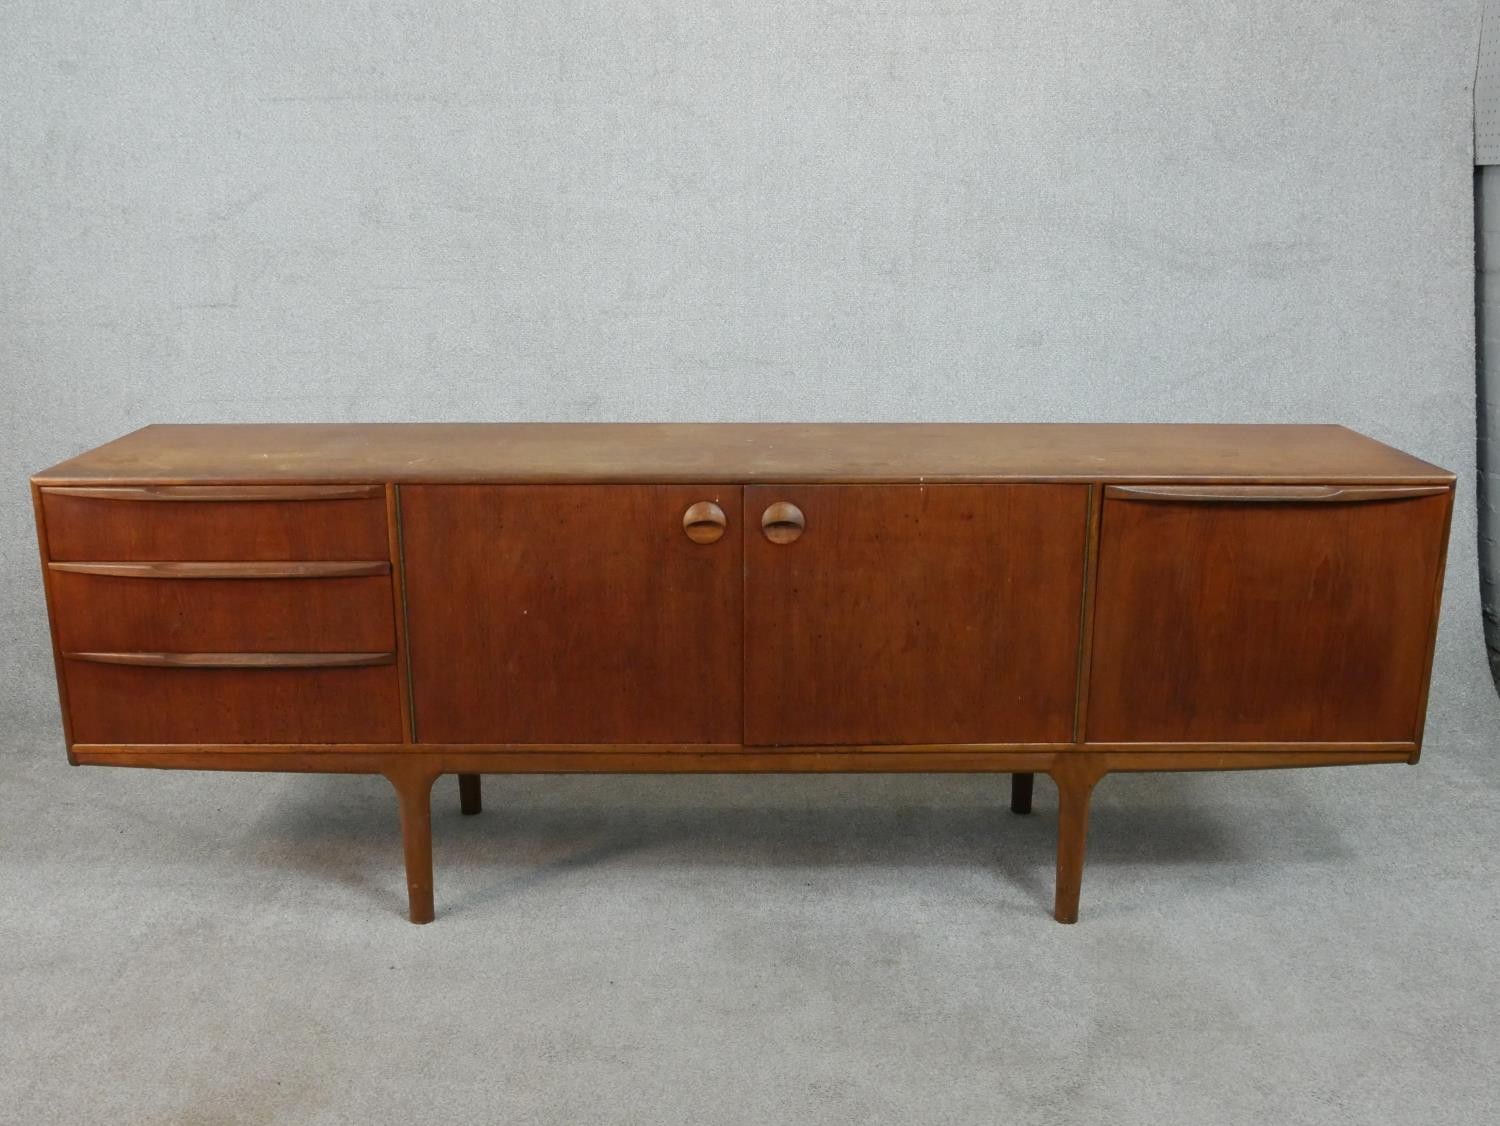 An A. H. McIntosh Ltd circa 1950s teak sideboard, with a pair of cupboard doors, flanked on one side